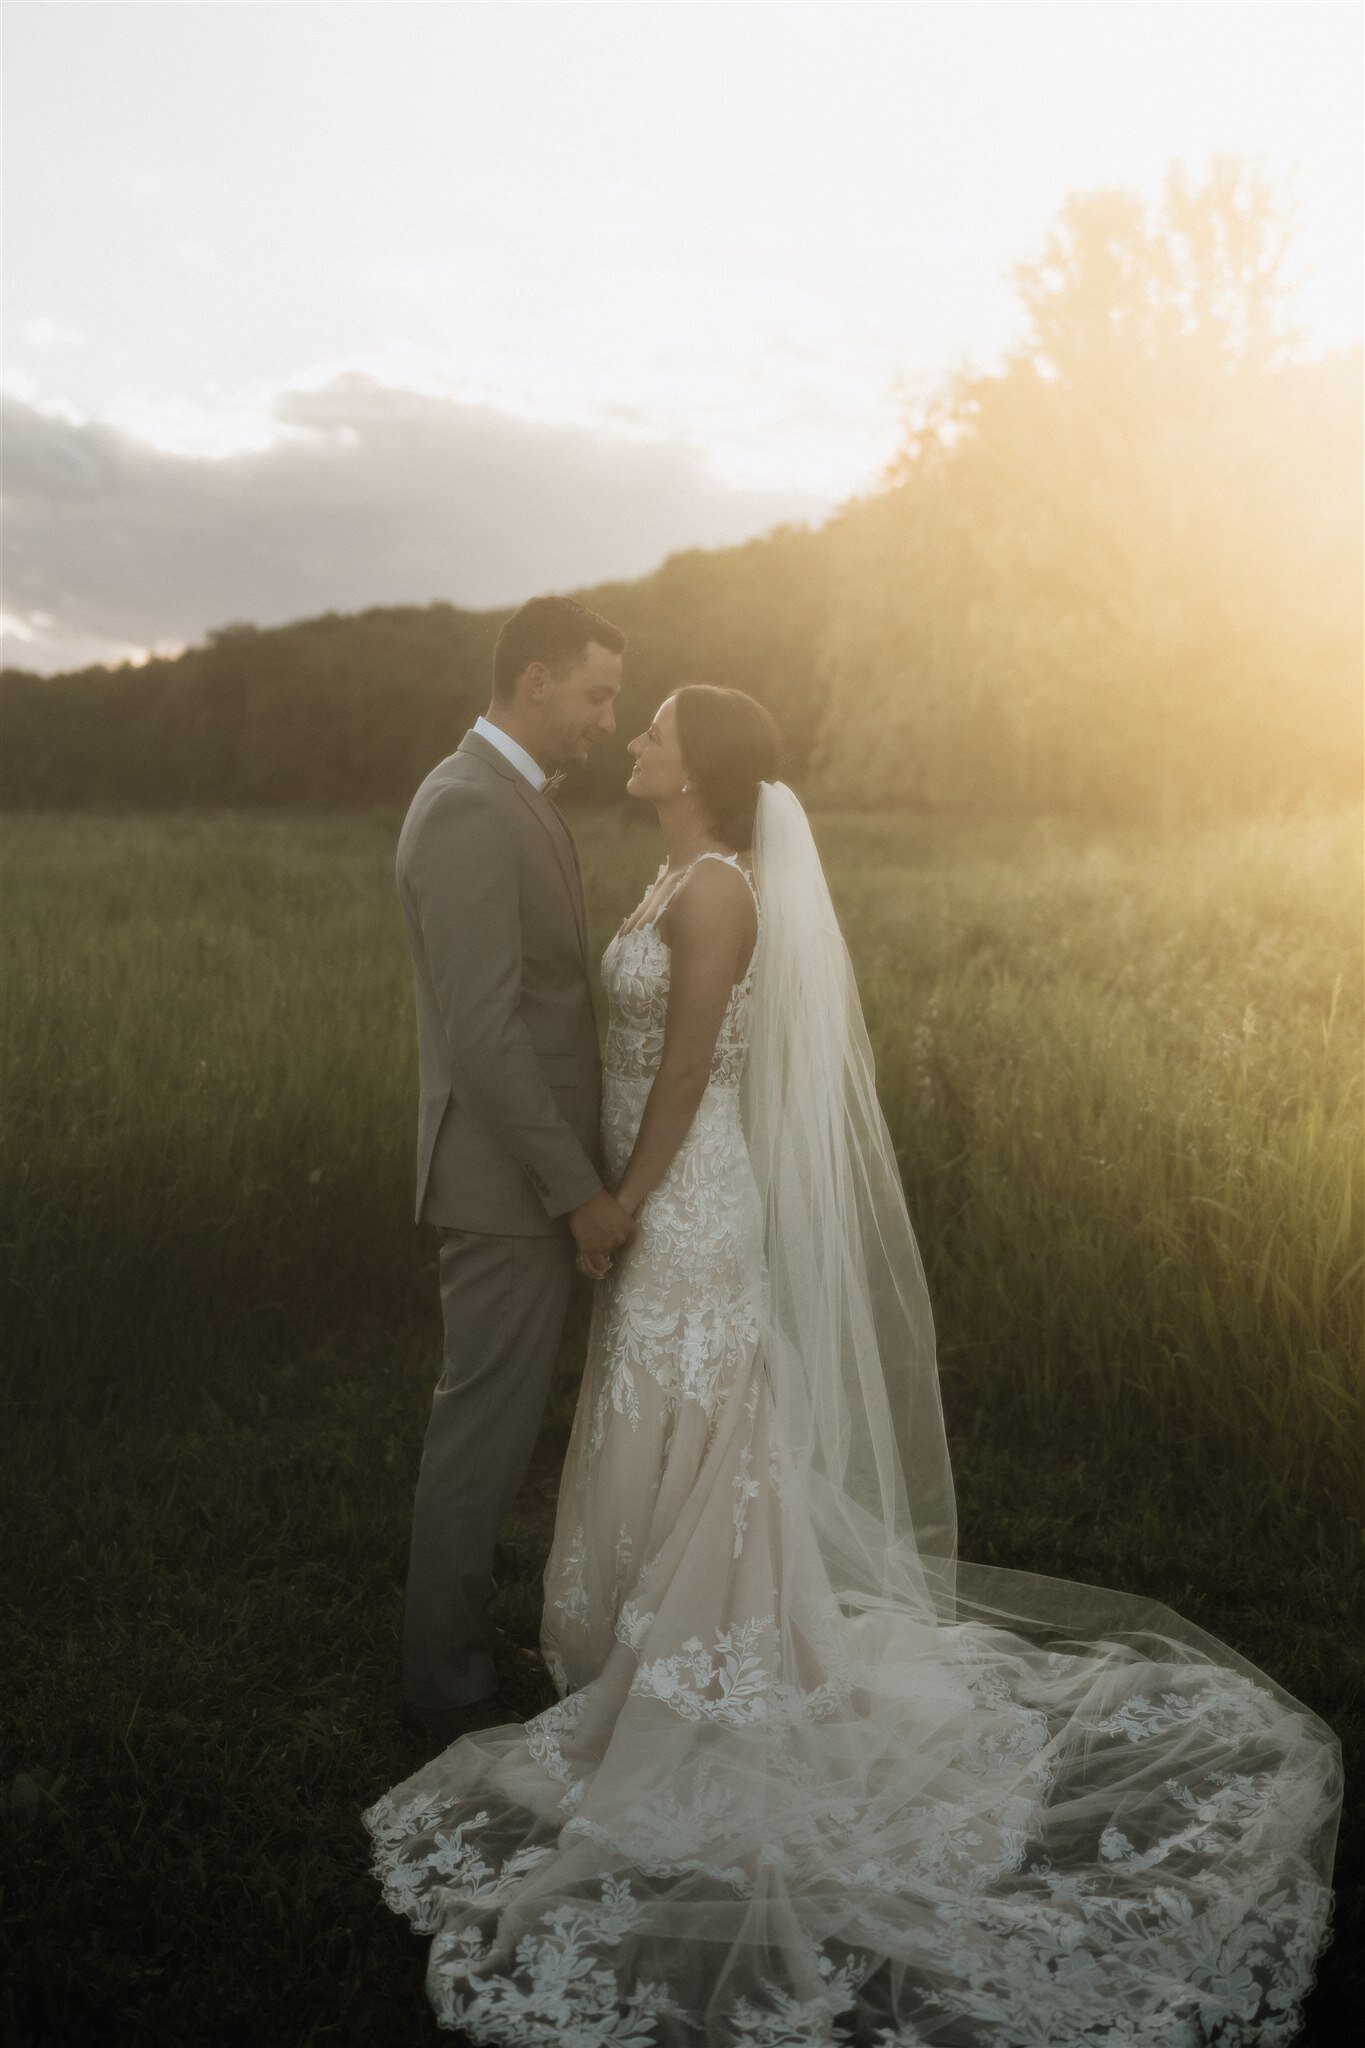 A film wedding portrait at sunset of bride and groom connecting